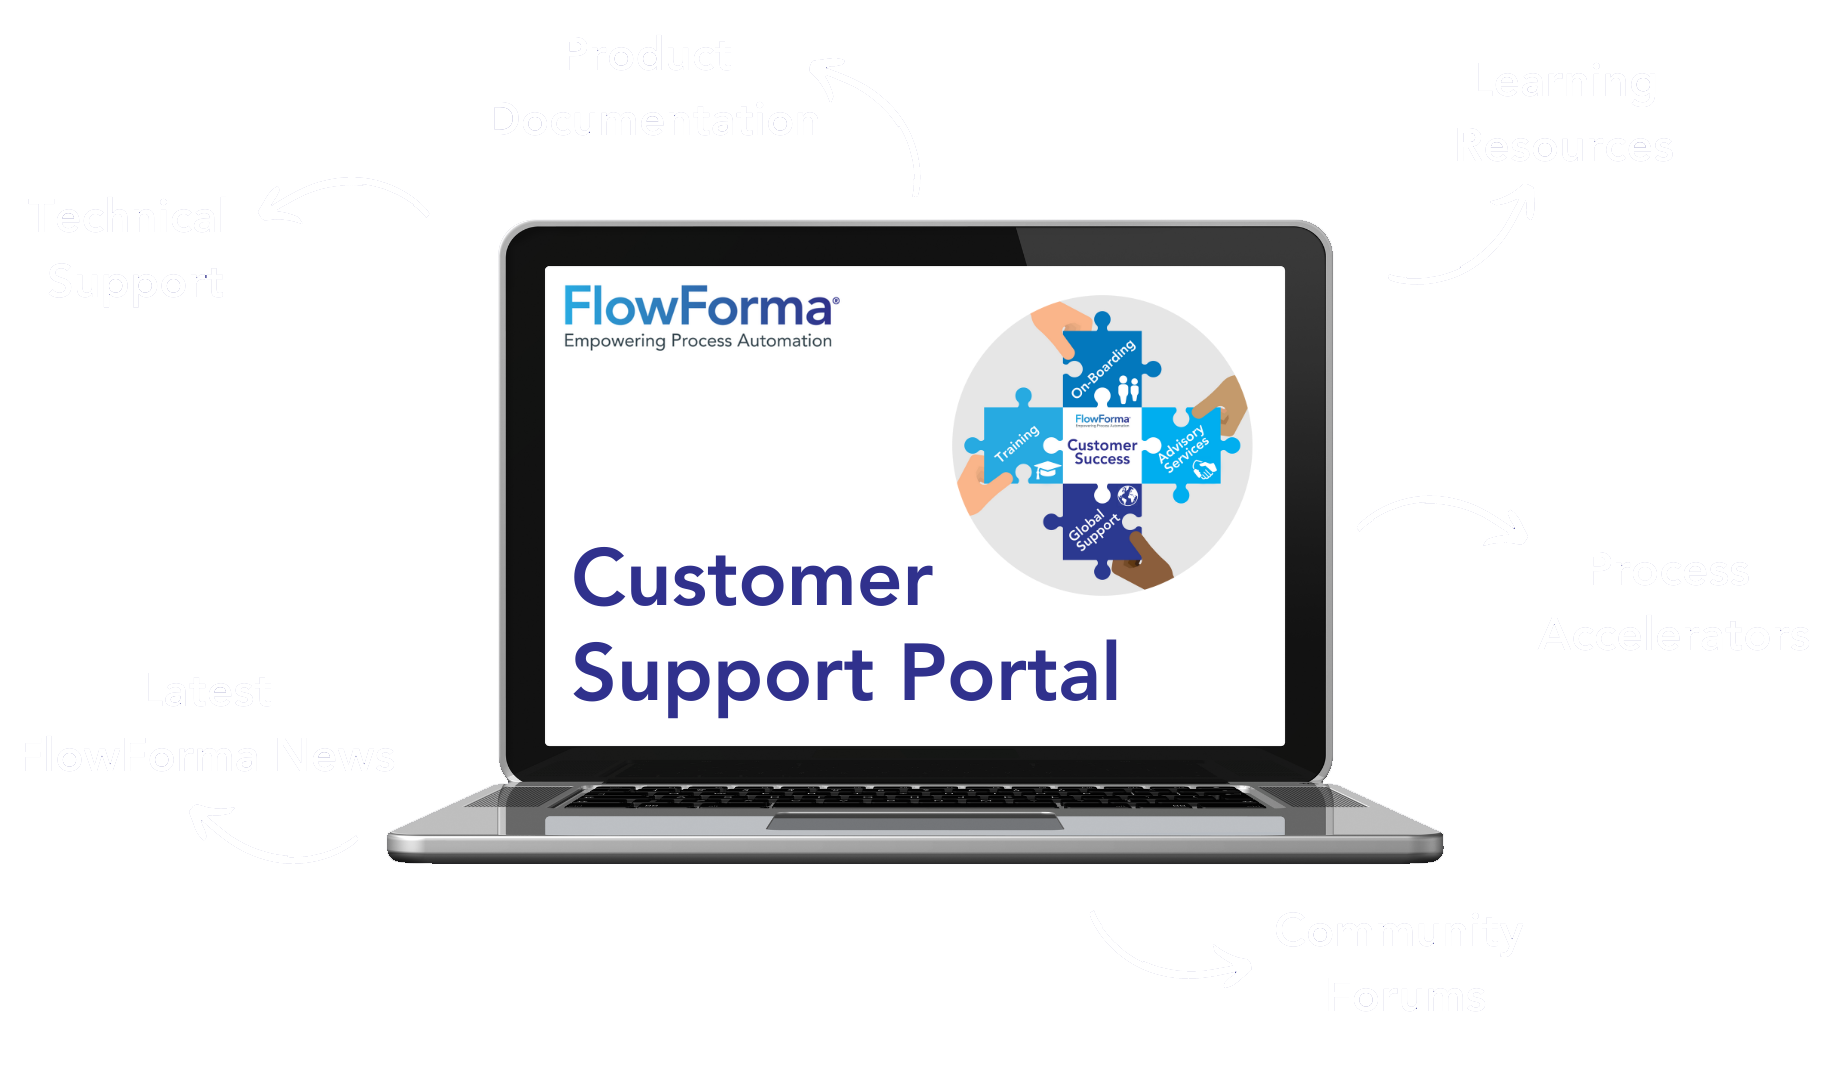 Customer support portal imagery